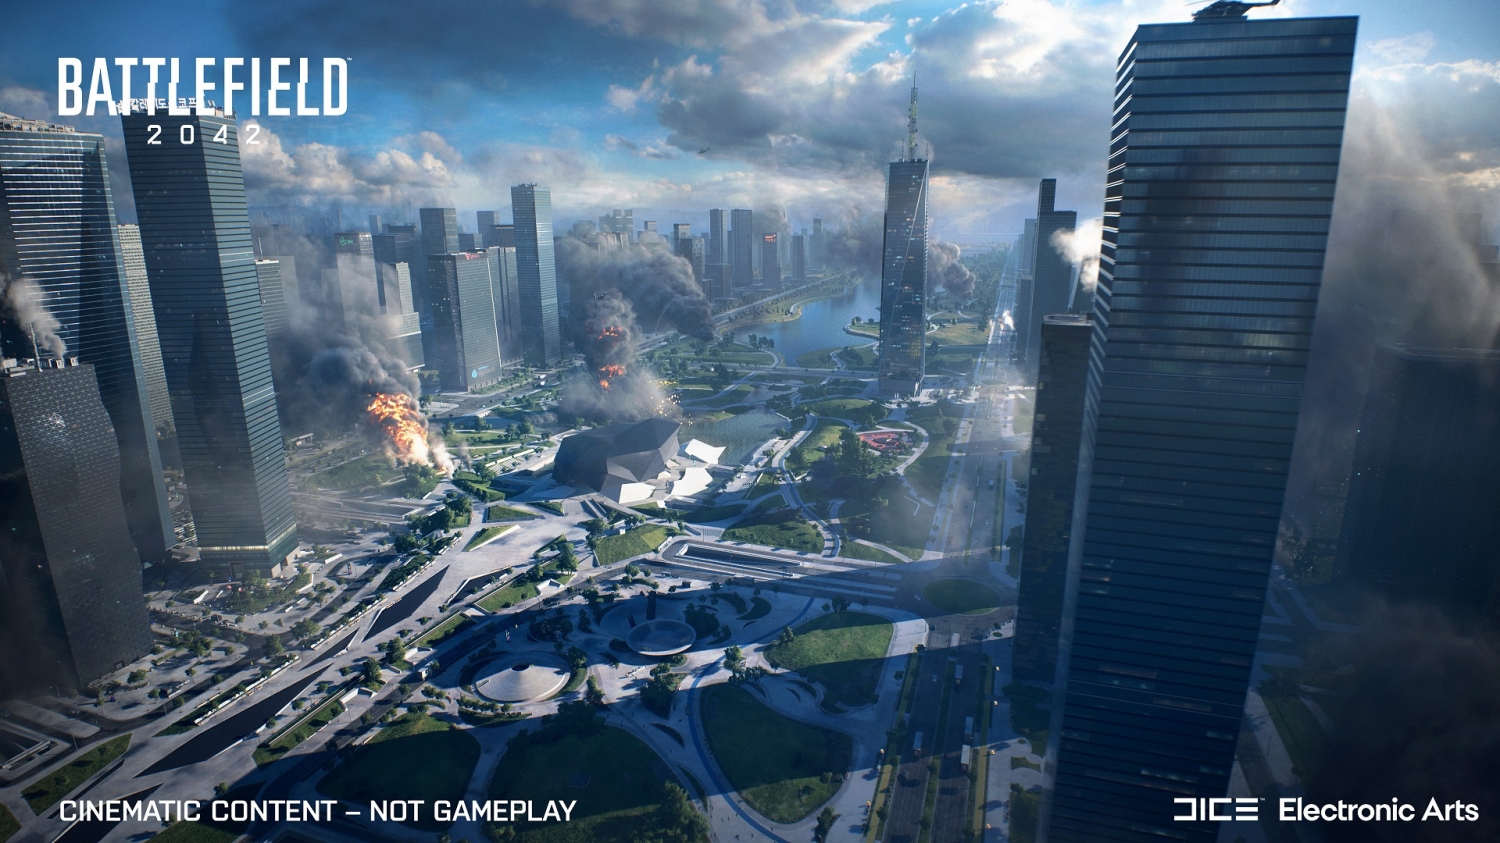 Battlefield 2042 was made in only 18 months – used to be battle royale